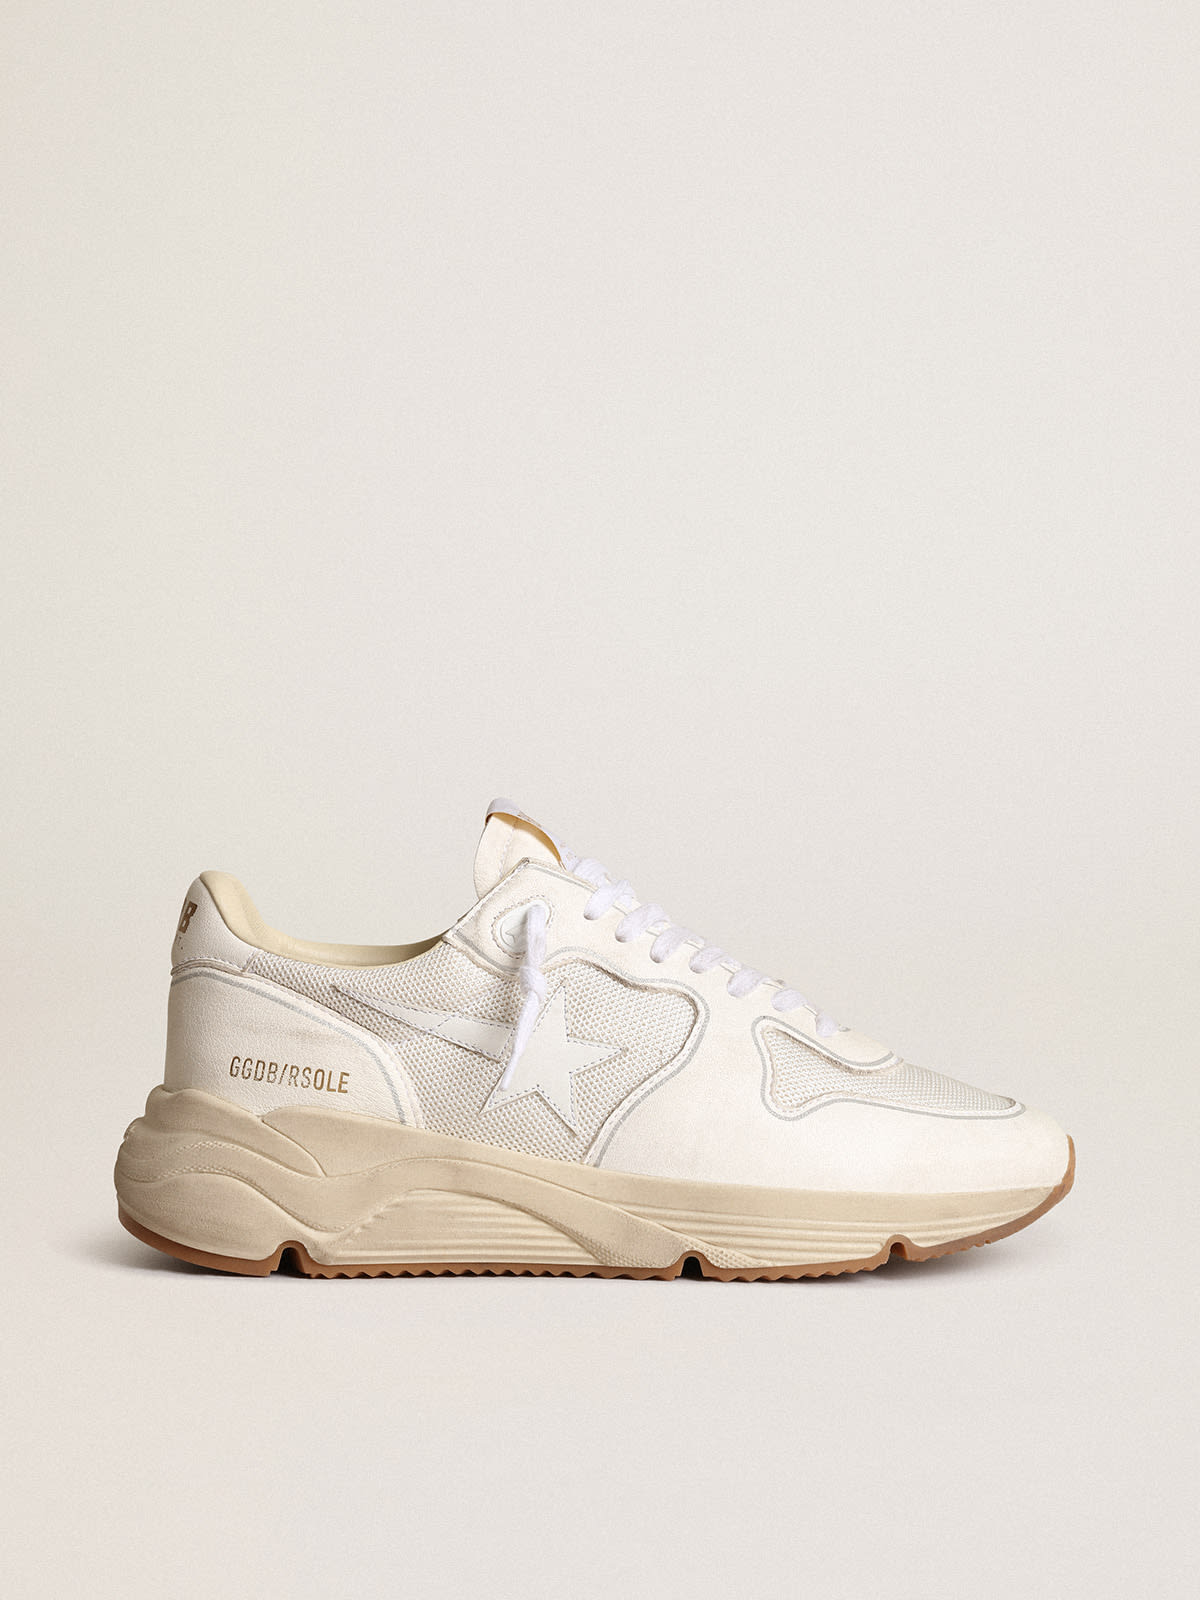 Golden Goose - Men's Running Sole in mesh and white nappa in 